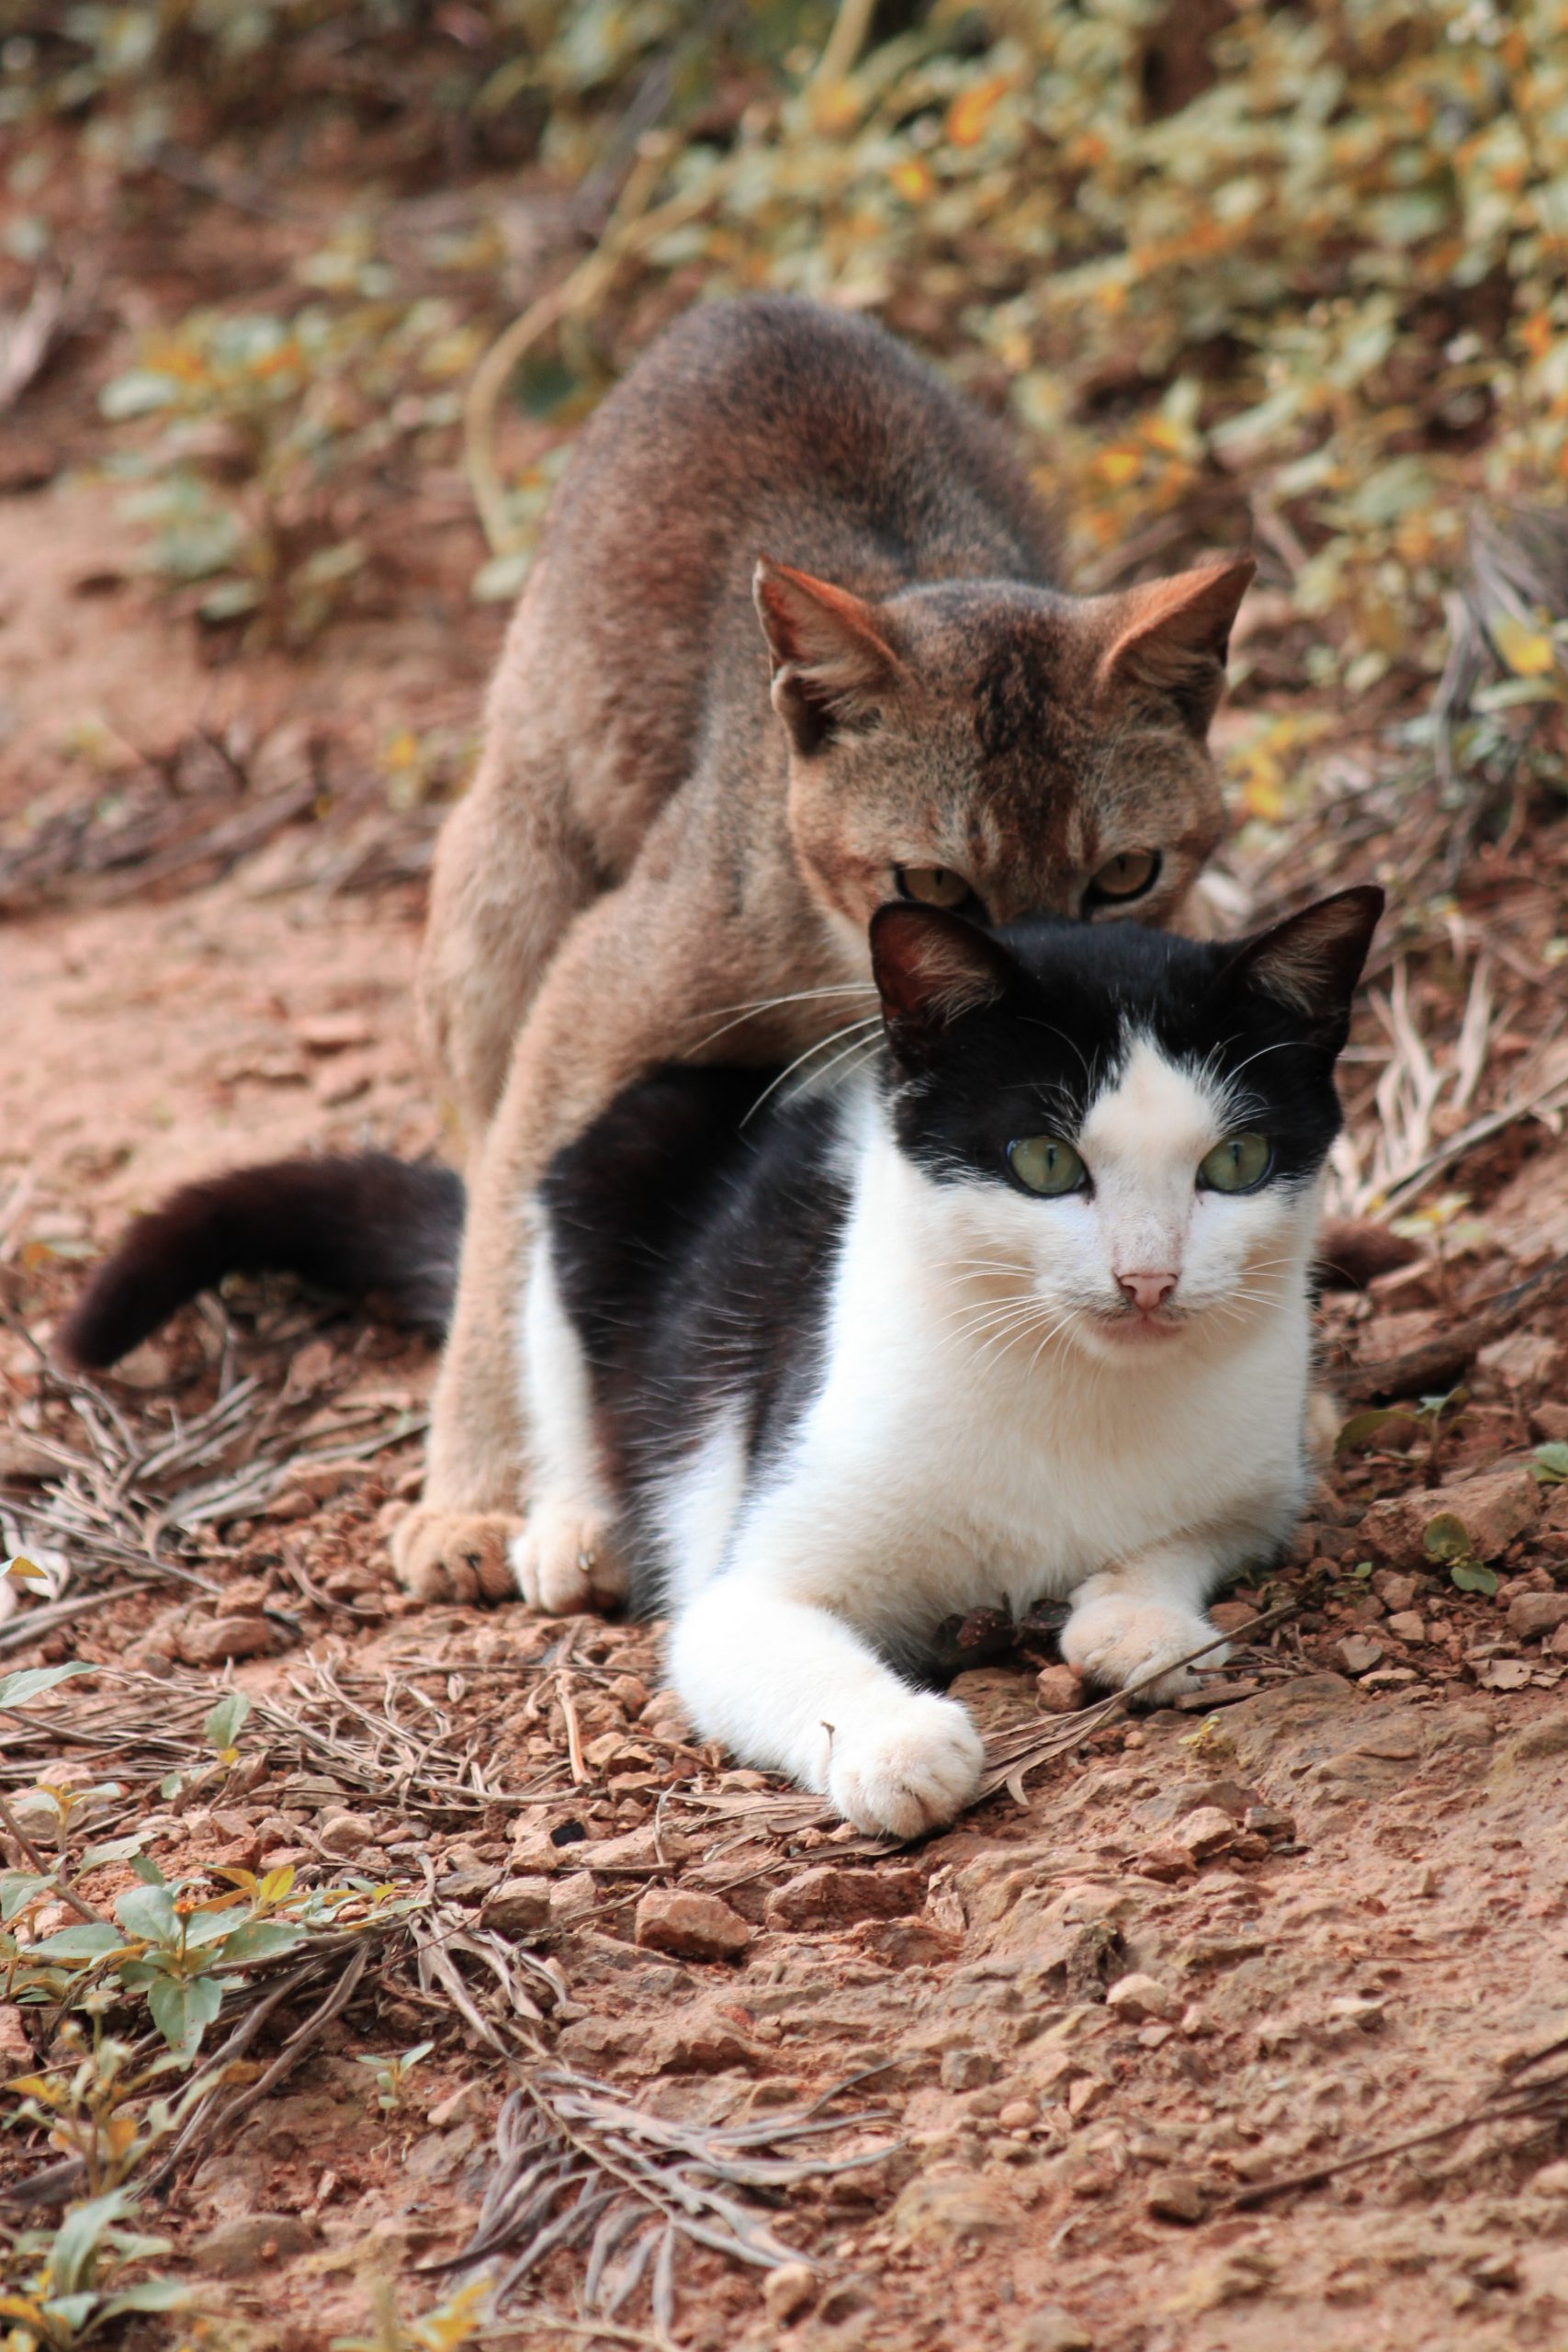 Cats mating in the jungle.